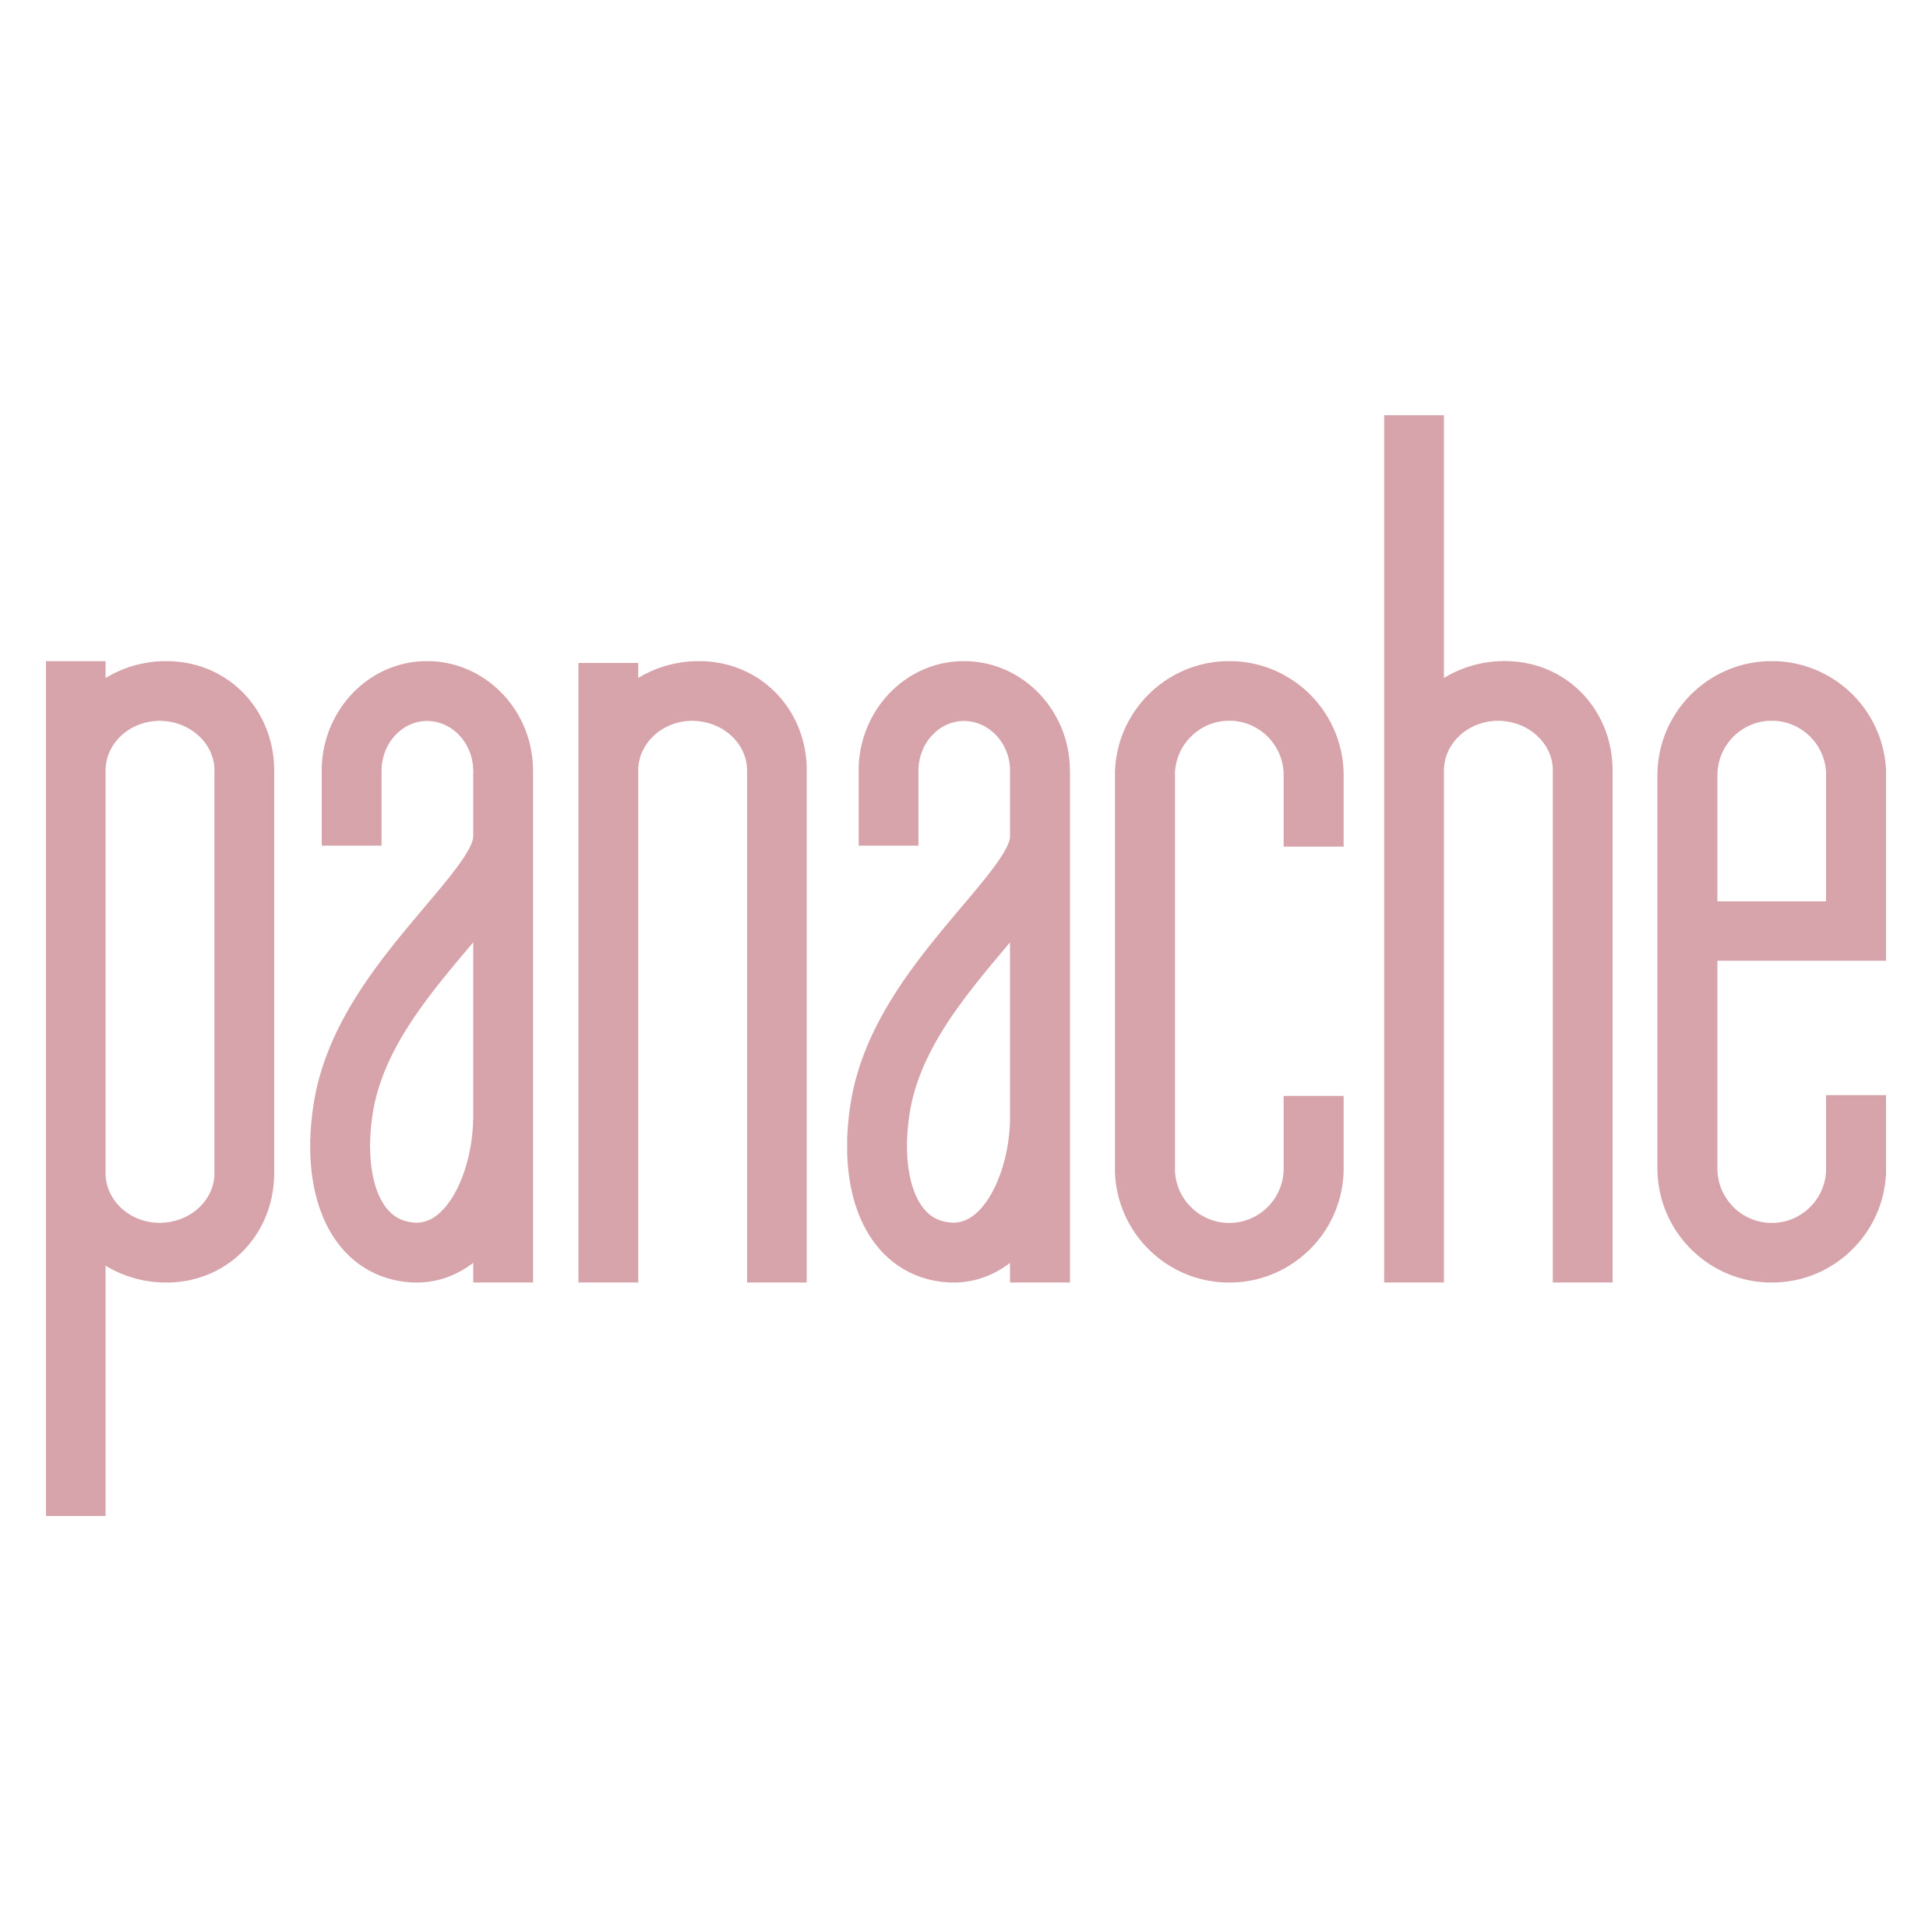 Logo of Panache Lingerie Ltd Consumer Products Manufacturers In SHEFFIELD, South Yorkshire